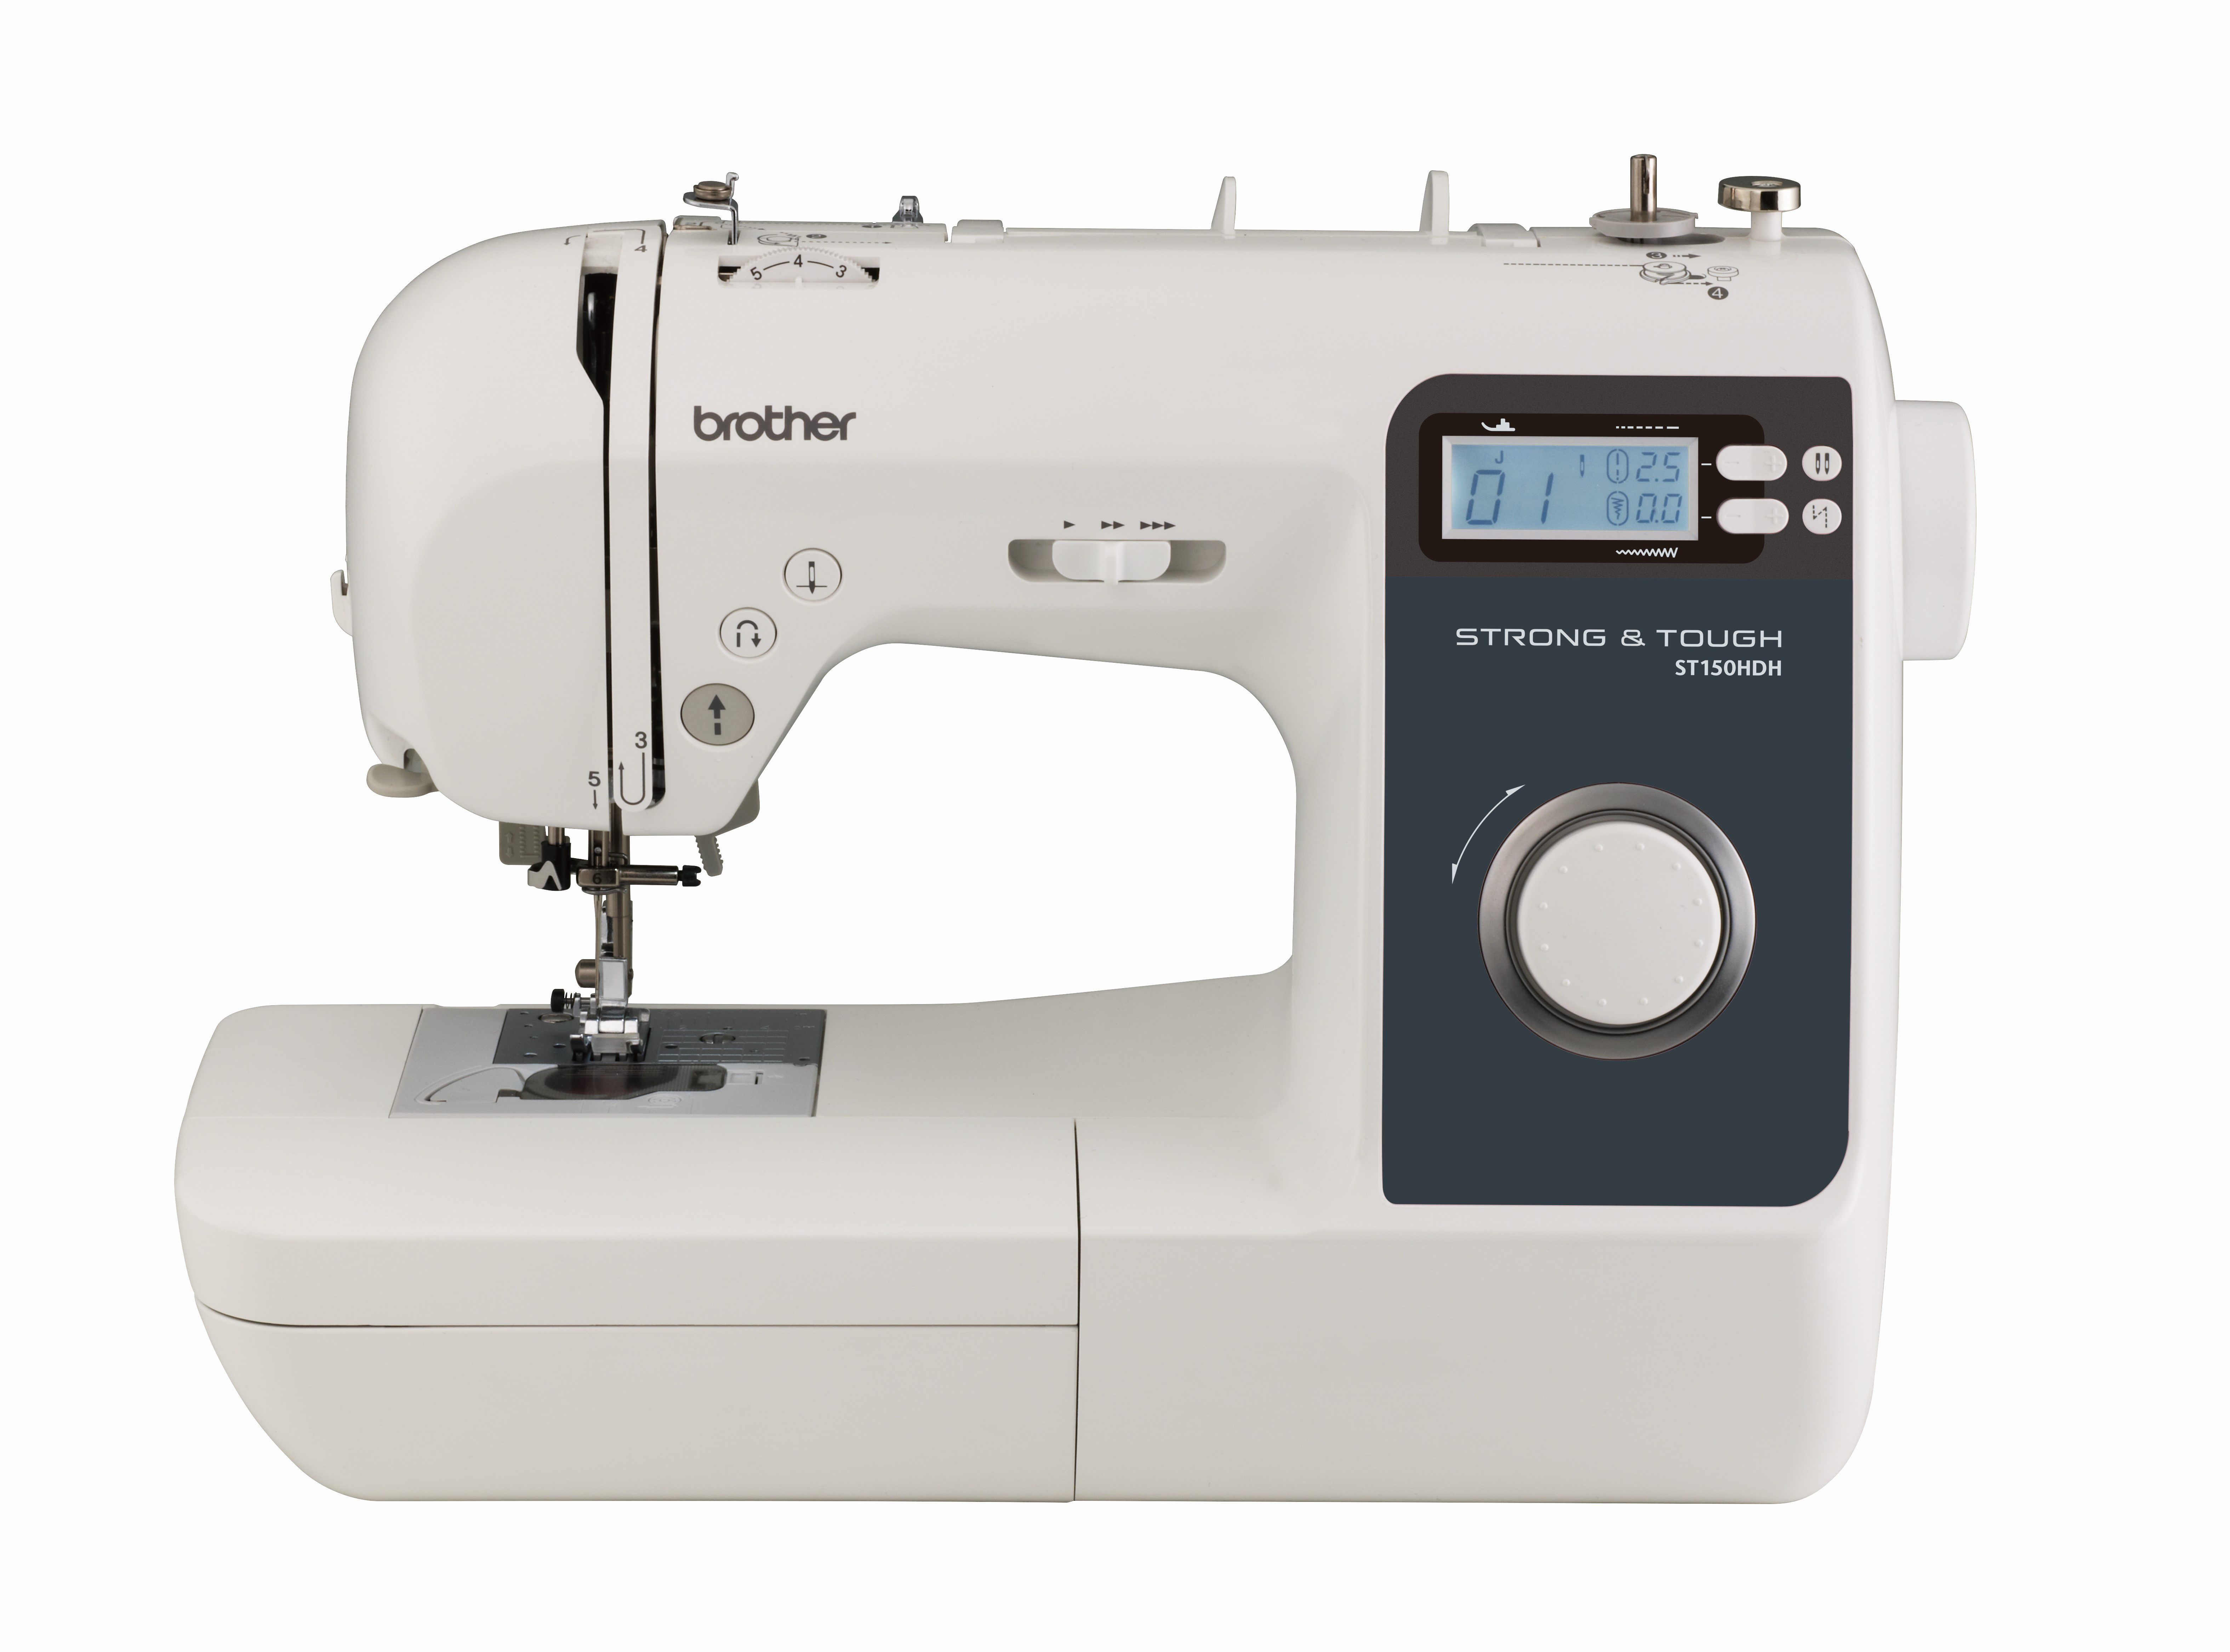 Strong & Tough Computerized Sewing Machine